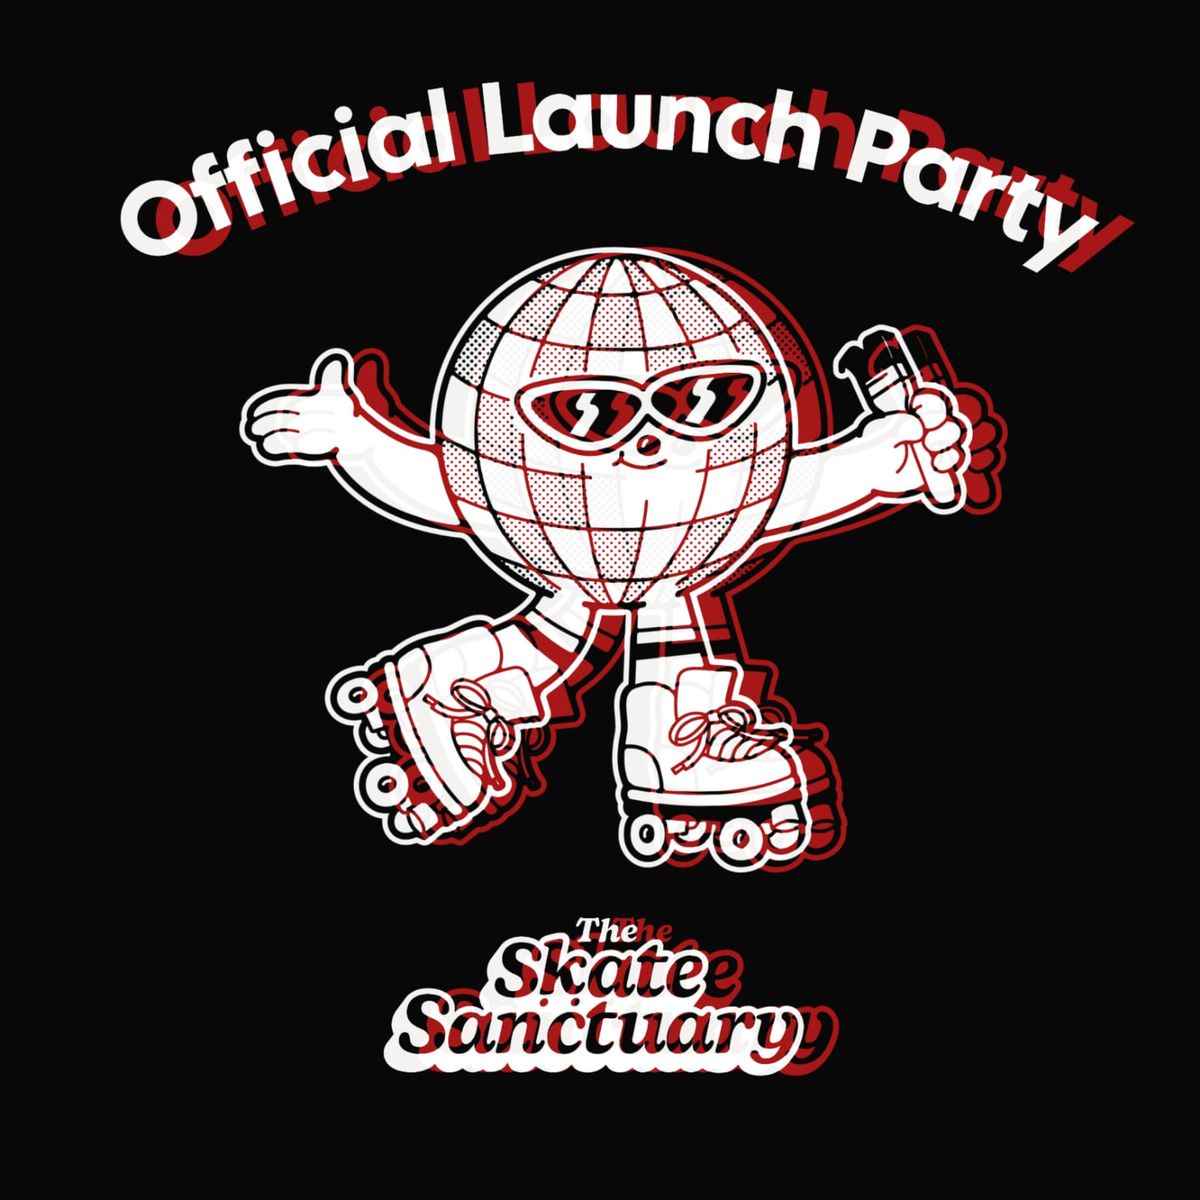 LATE NIGHT OFFICIAL LAUNCH PARTY 17+